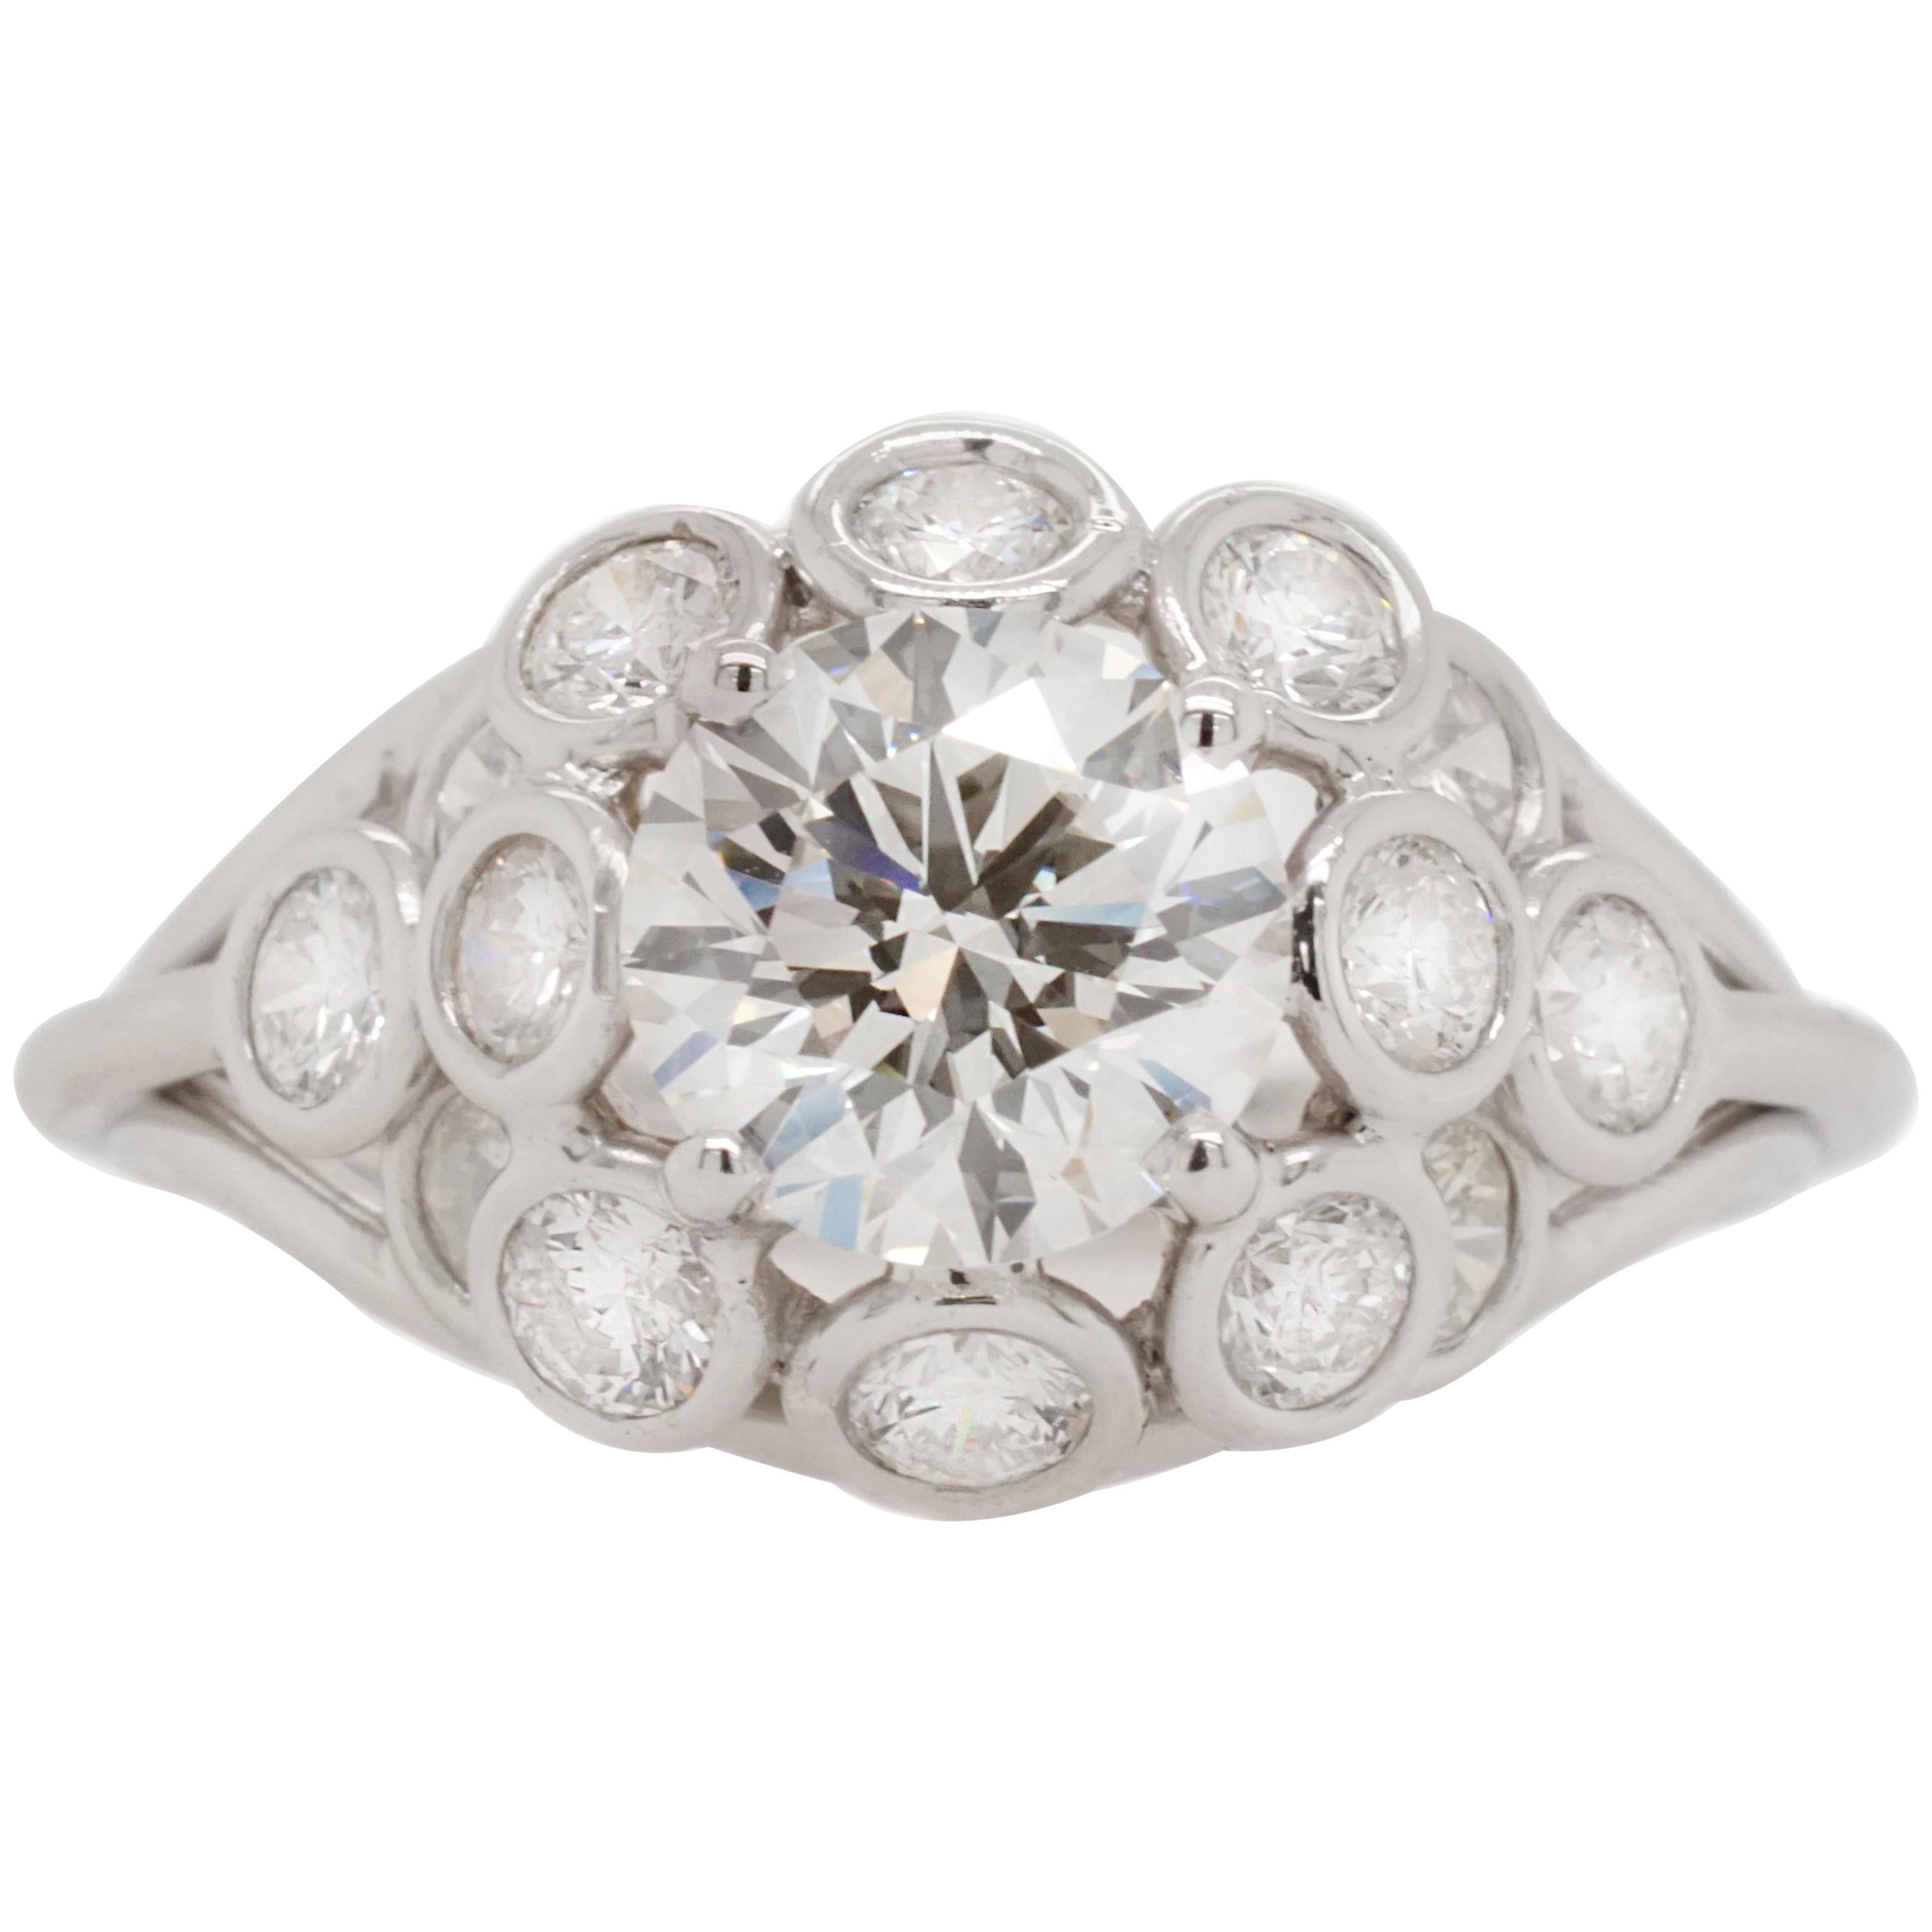 GIA Certified 1.73 Carat Diamond Ring For Sale